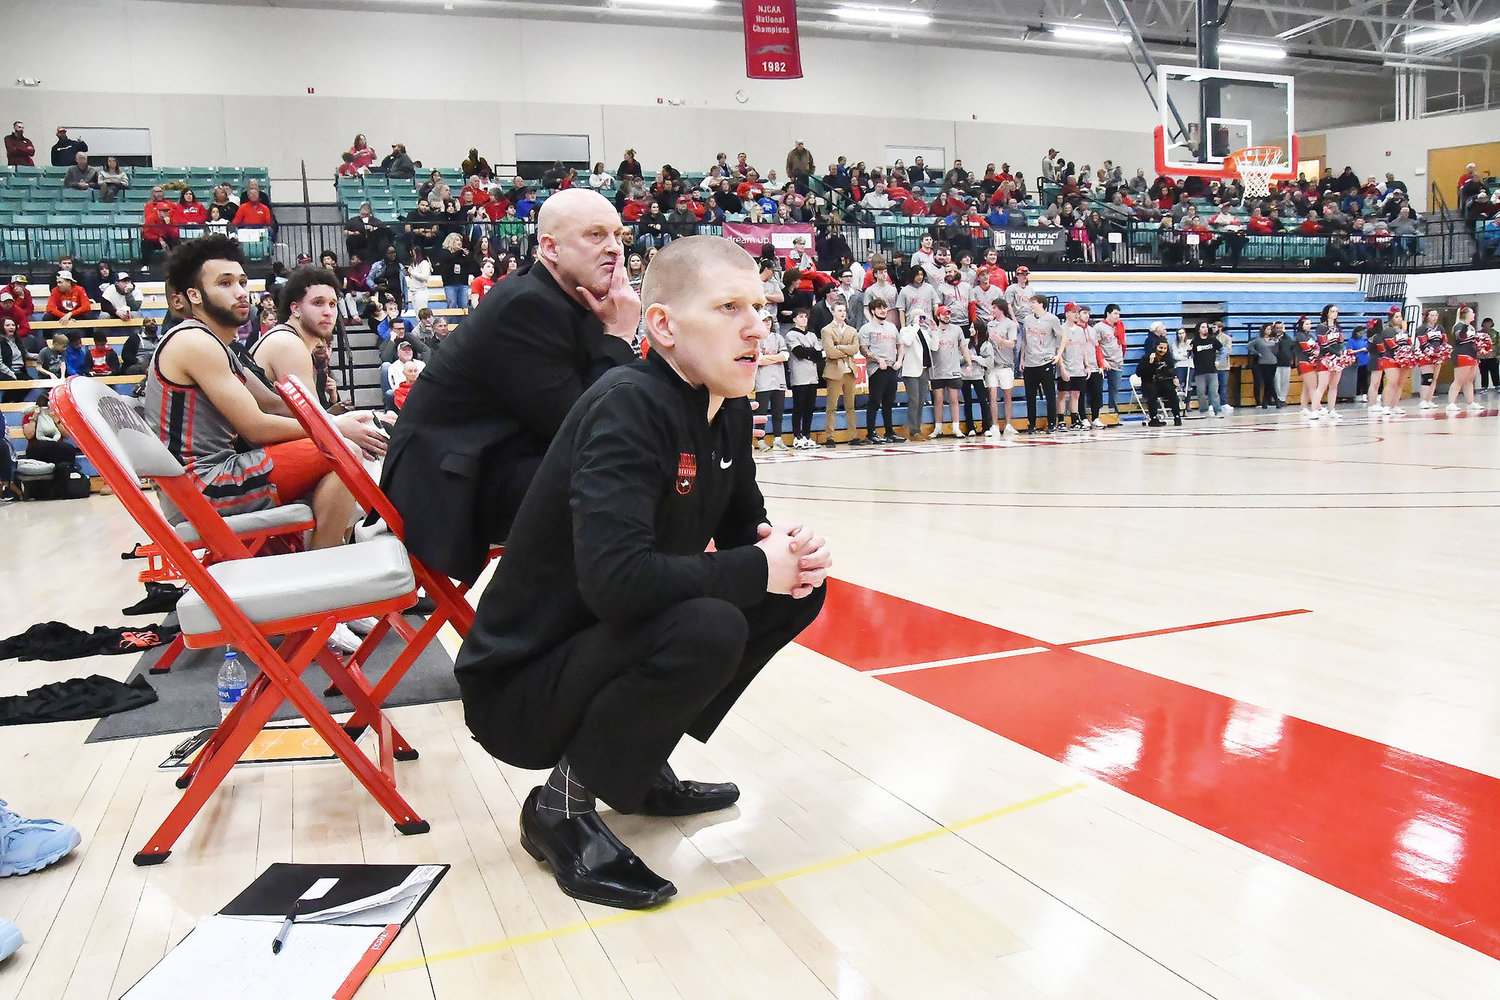 Moberly Area men's basketball coaches Pat Smith and James Hays (foreground) watch the action during the second half.